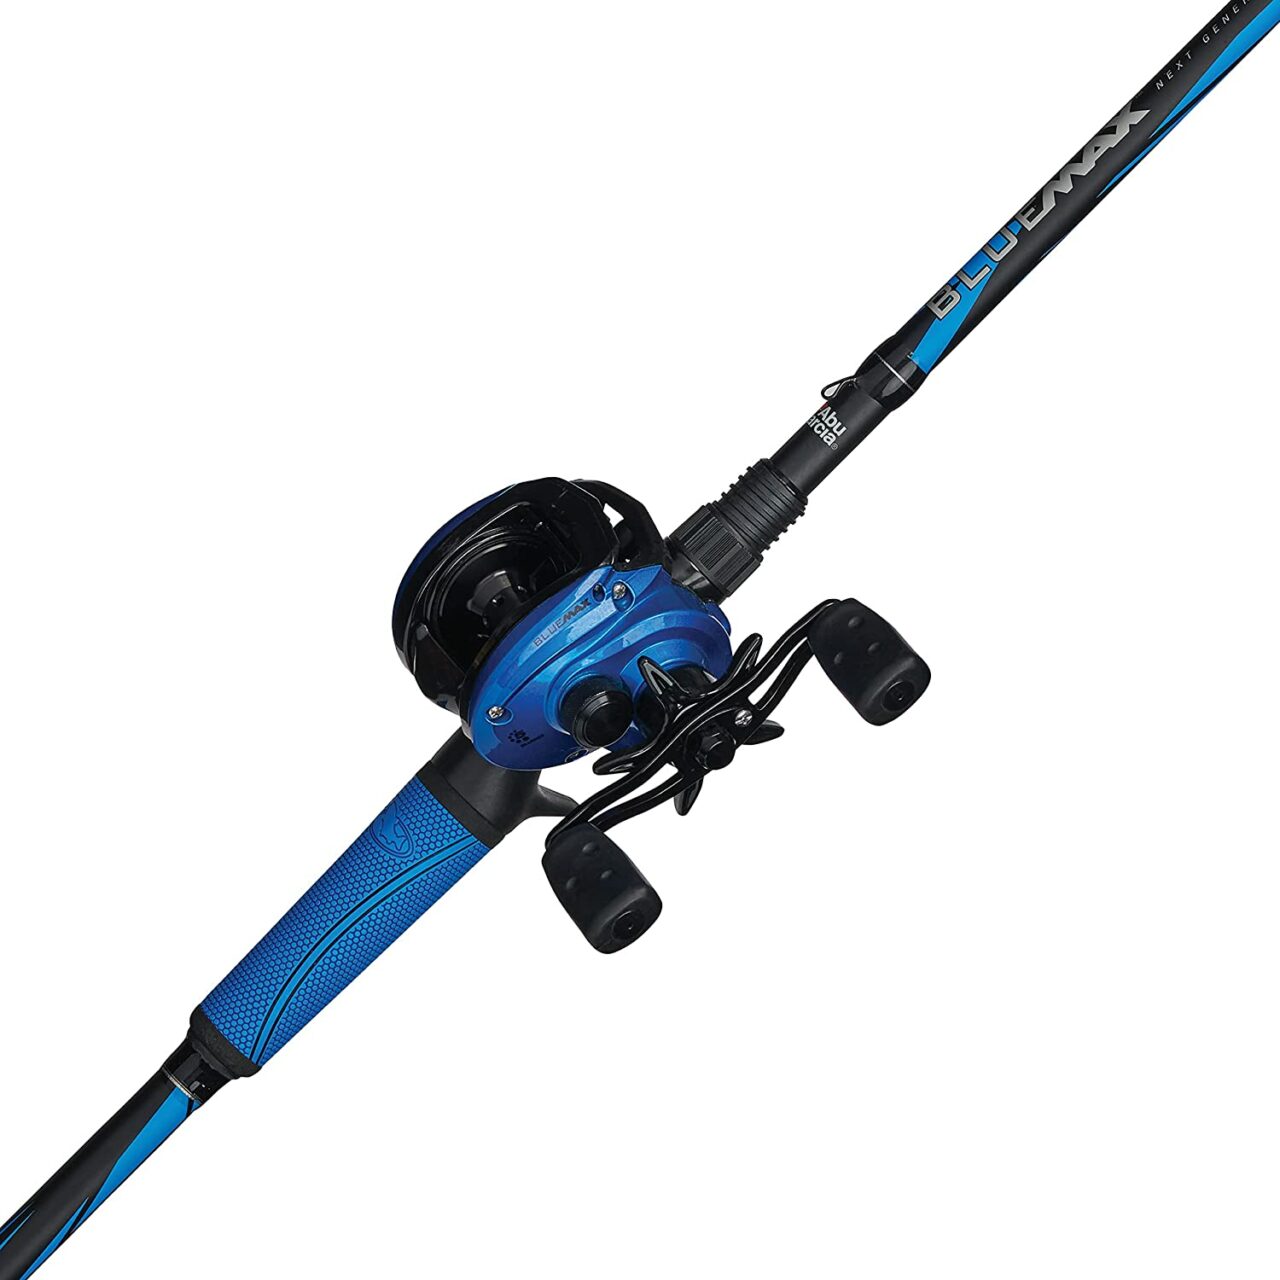 Best Bass Fishing Rod and Reel: Abu Garcia Blue Max Low Profile Baitcast Reel and Fishing Rod Combo, 7'